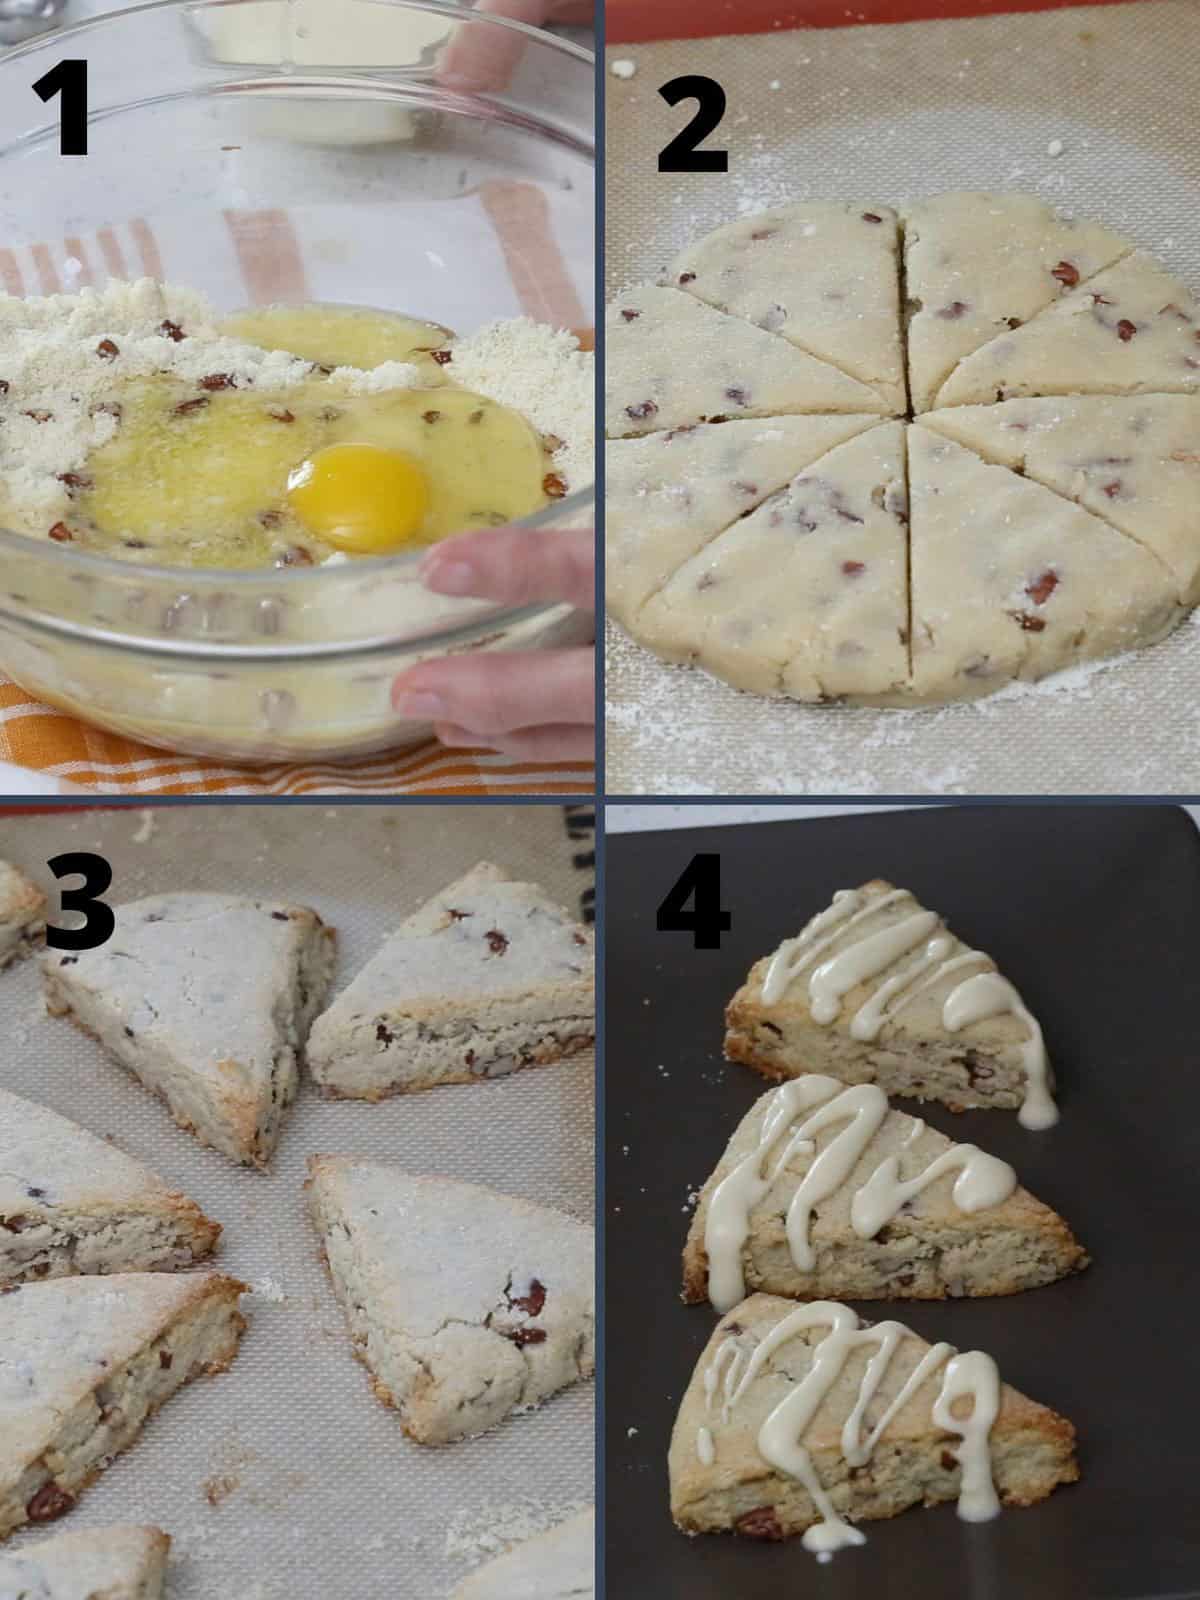 A collage of 4 images showing the steps for making Maple Pecan Scones.